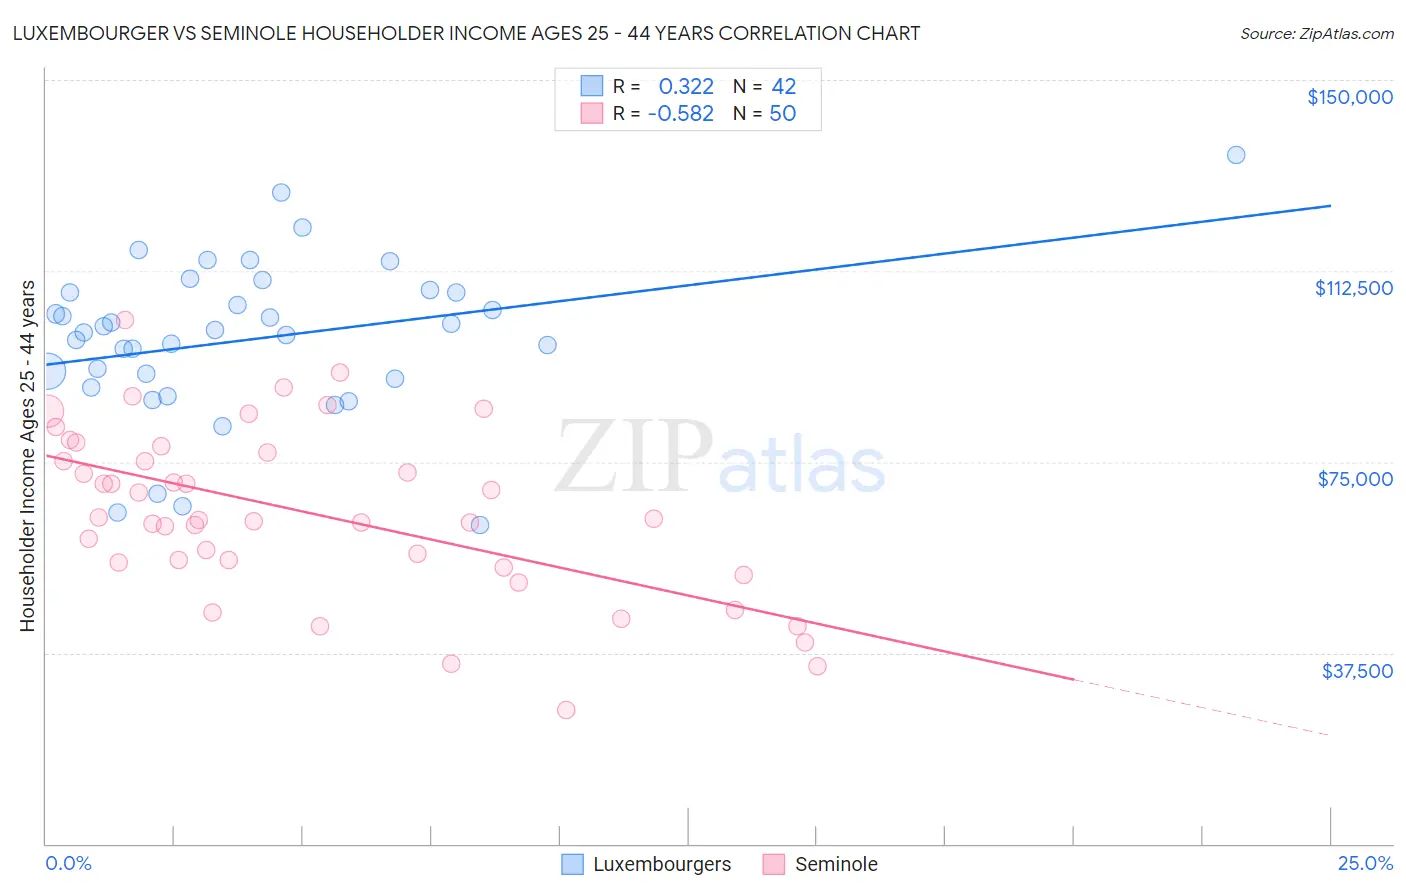 Luxembourger vs Seminole Householder Income Ages 25 - 44 years